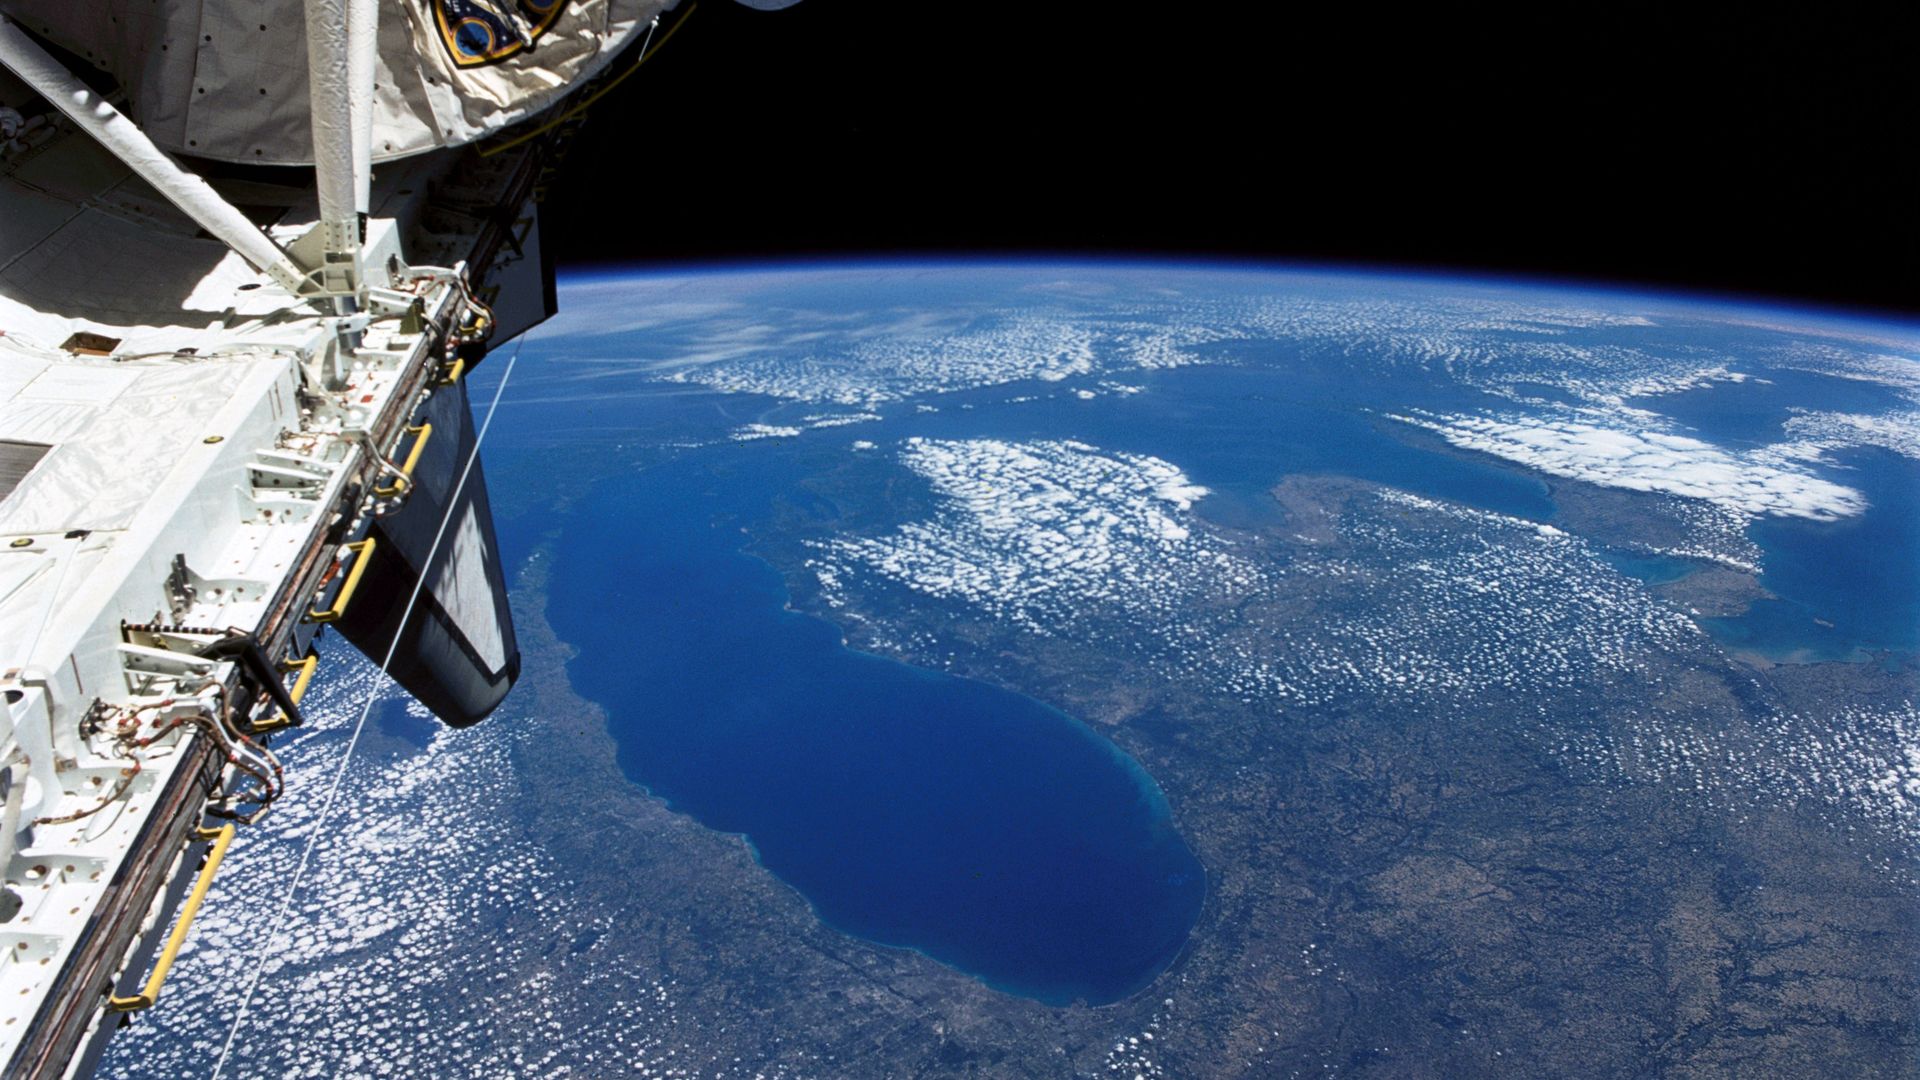 The state of Michigan from space shuttle Columbia in June, 1991. Photo: HUM Images/Universal Images Group via Getty Images)